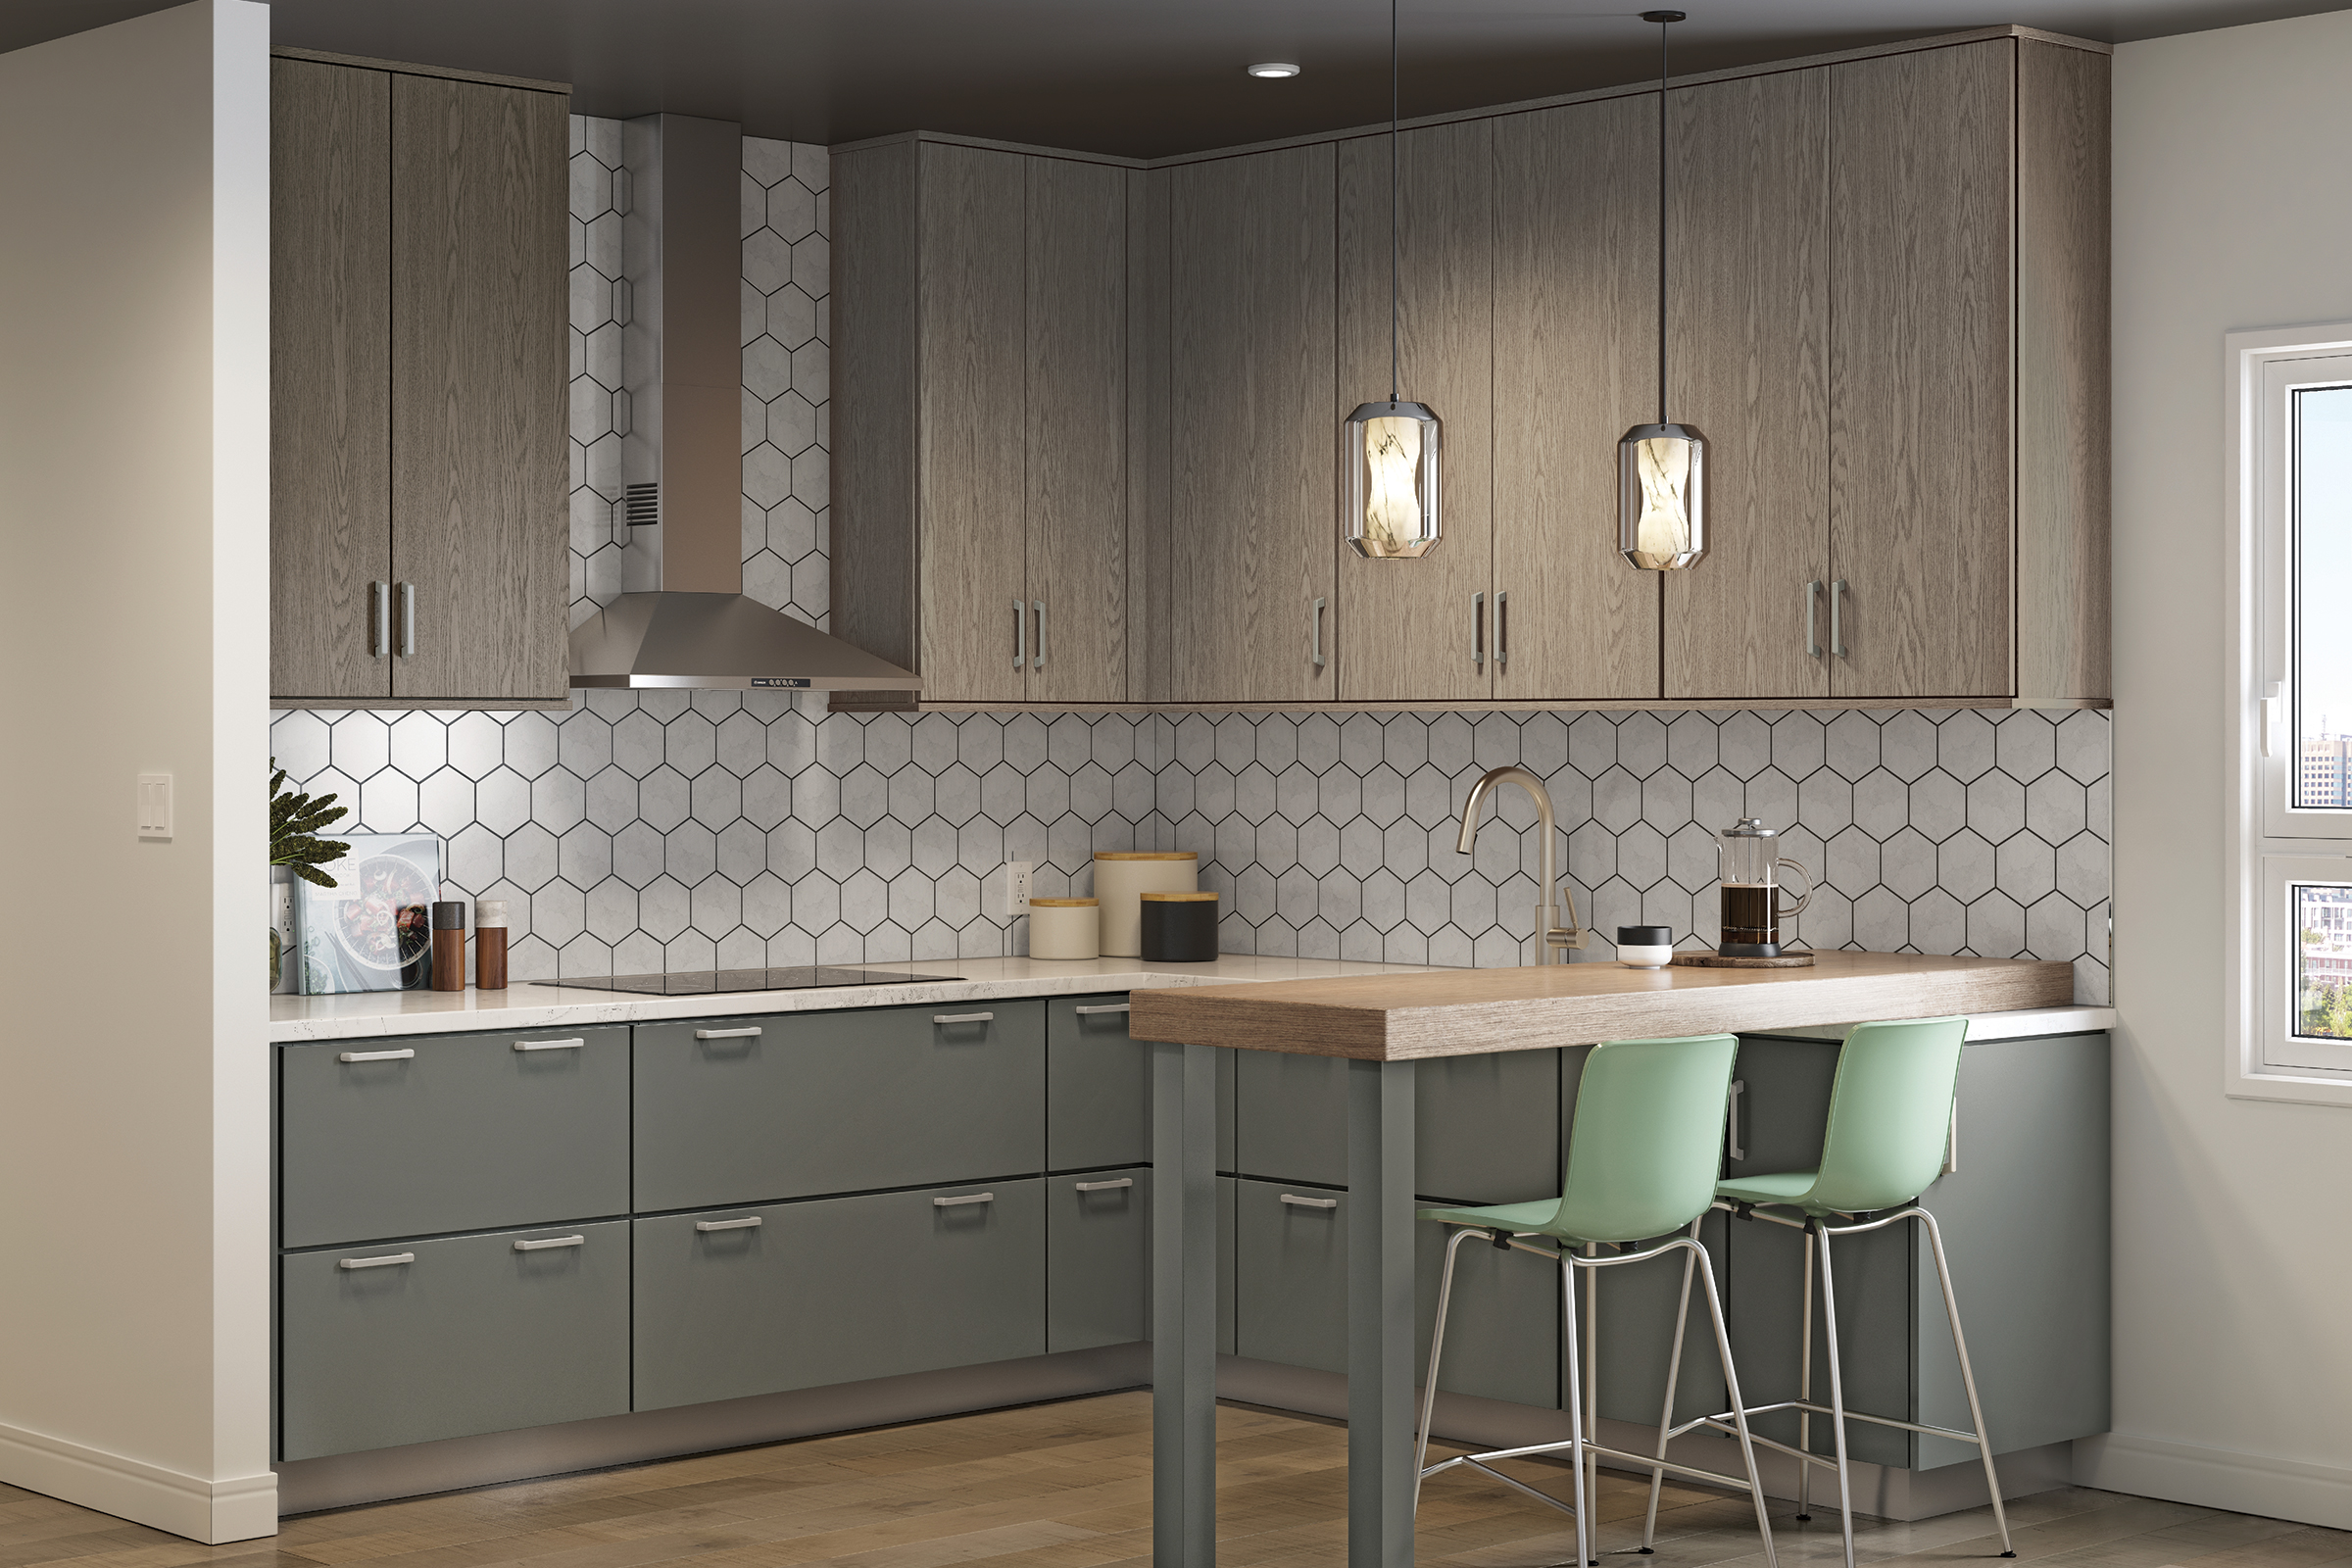 Modern loft-style design with KraftMaid modern slab kitchen cabinet doors finished in Translucent Monument Grey and Greyloft paint